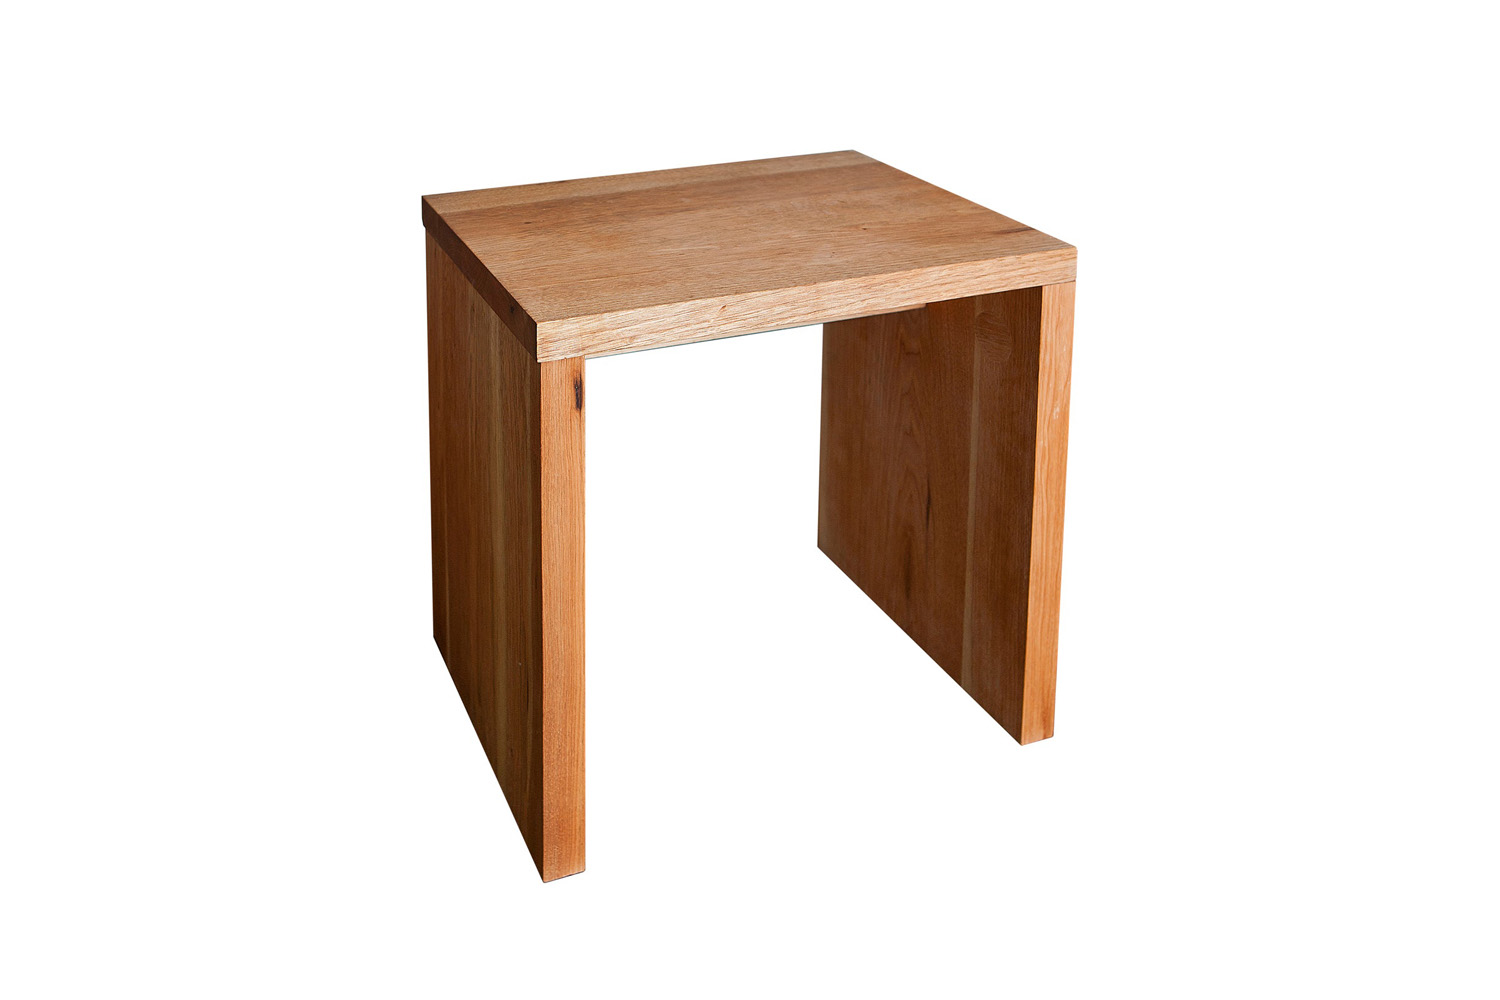 the mash studios lax dining stool is \$3\25 at horne. 15